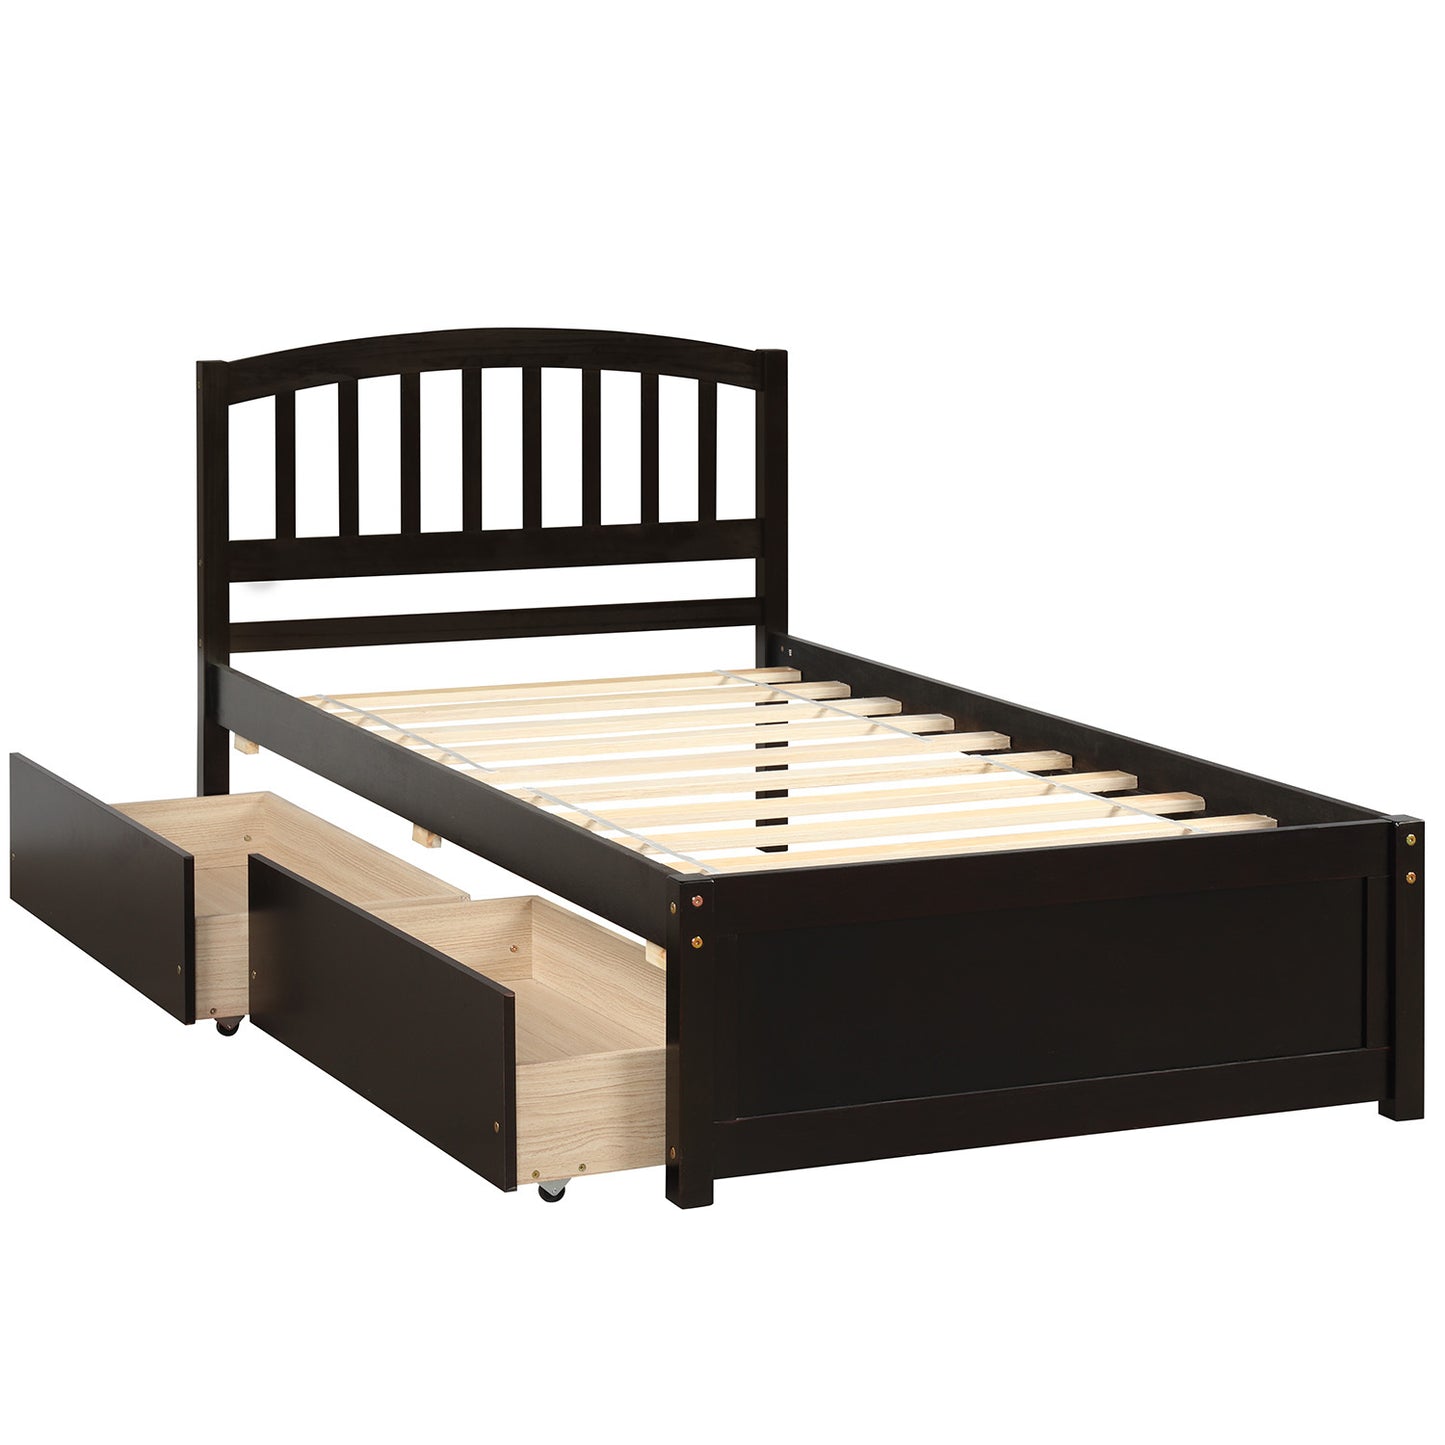 Twin Size 2 Drawers Platform Bed Frame with Headboard